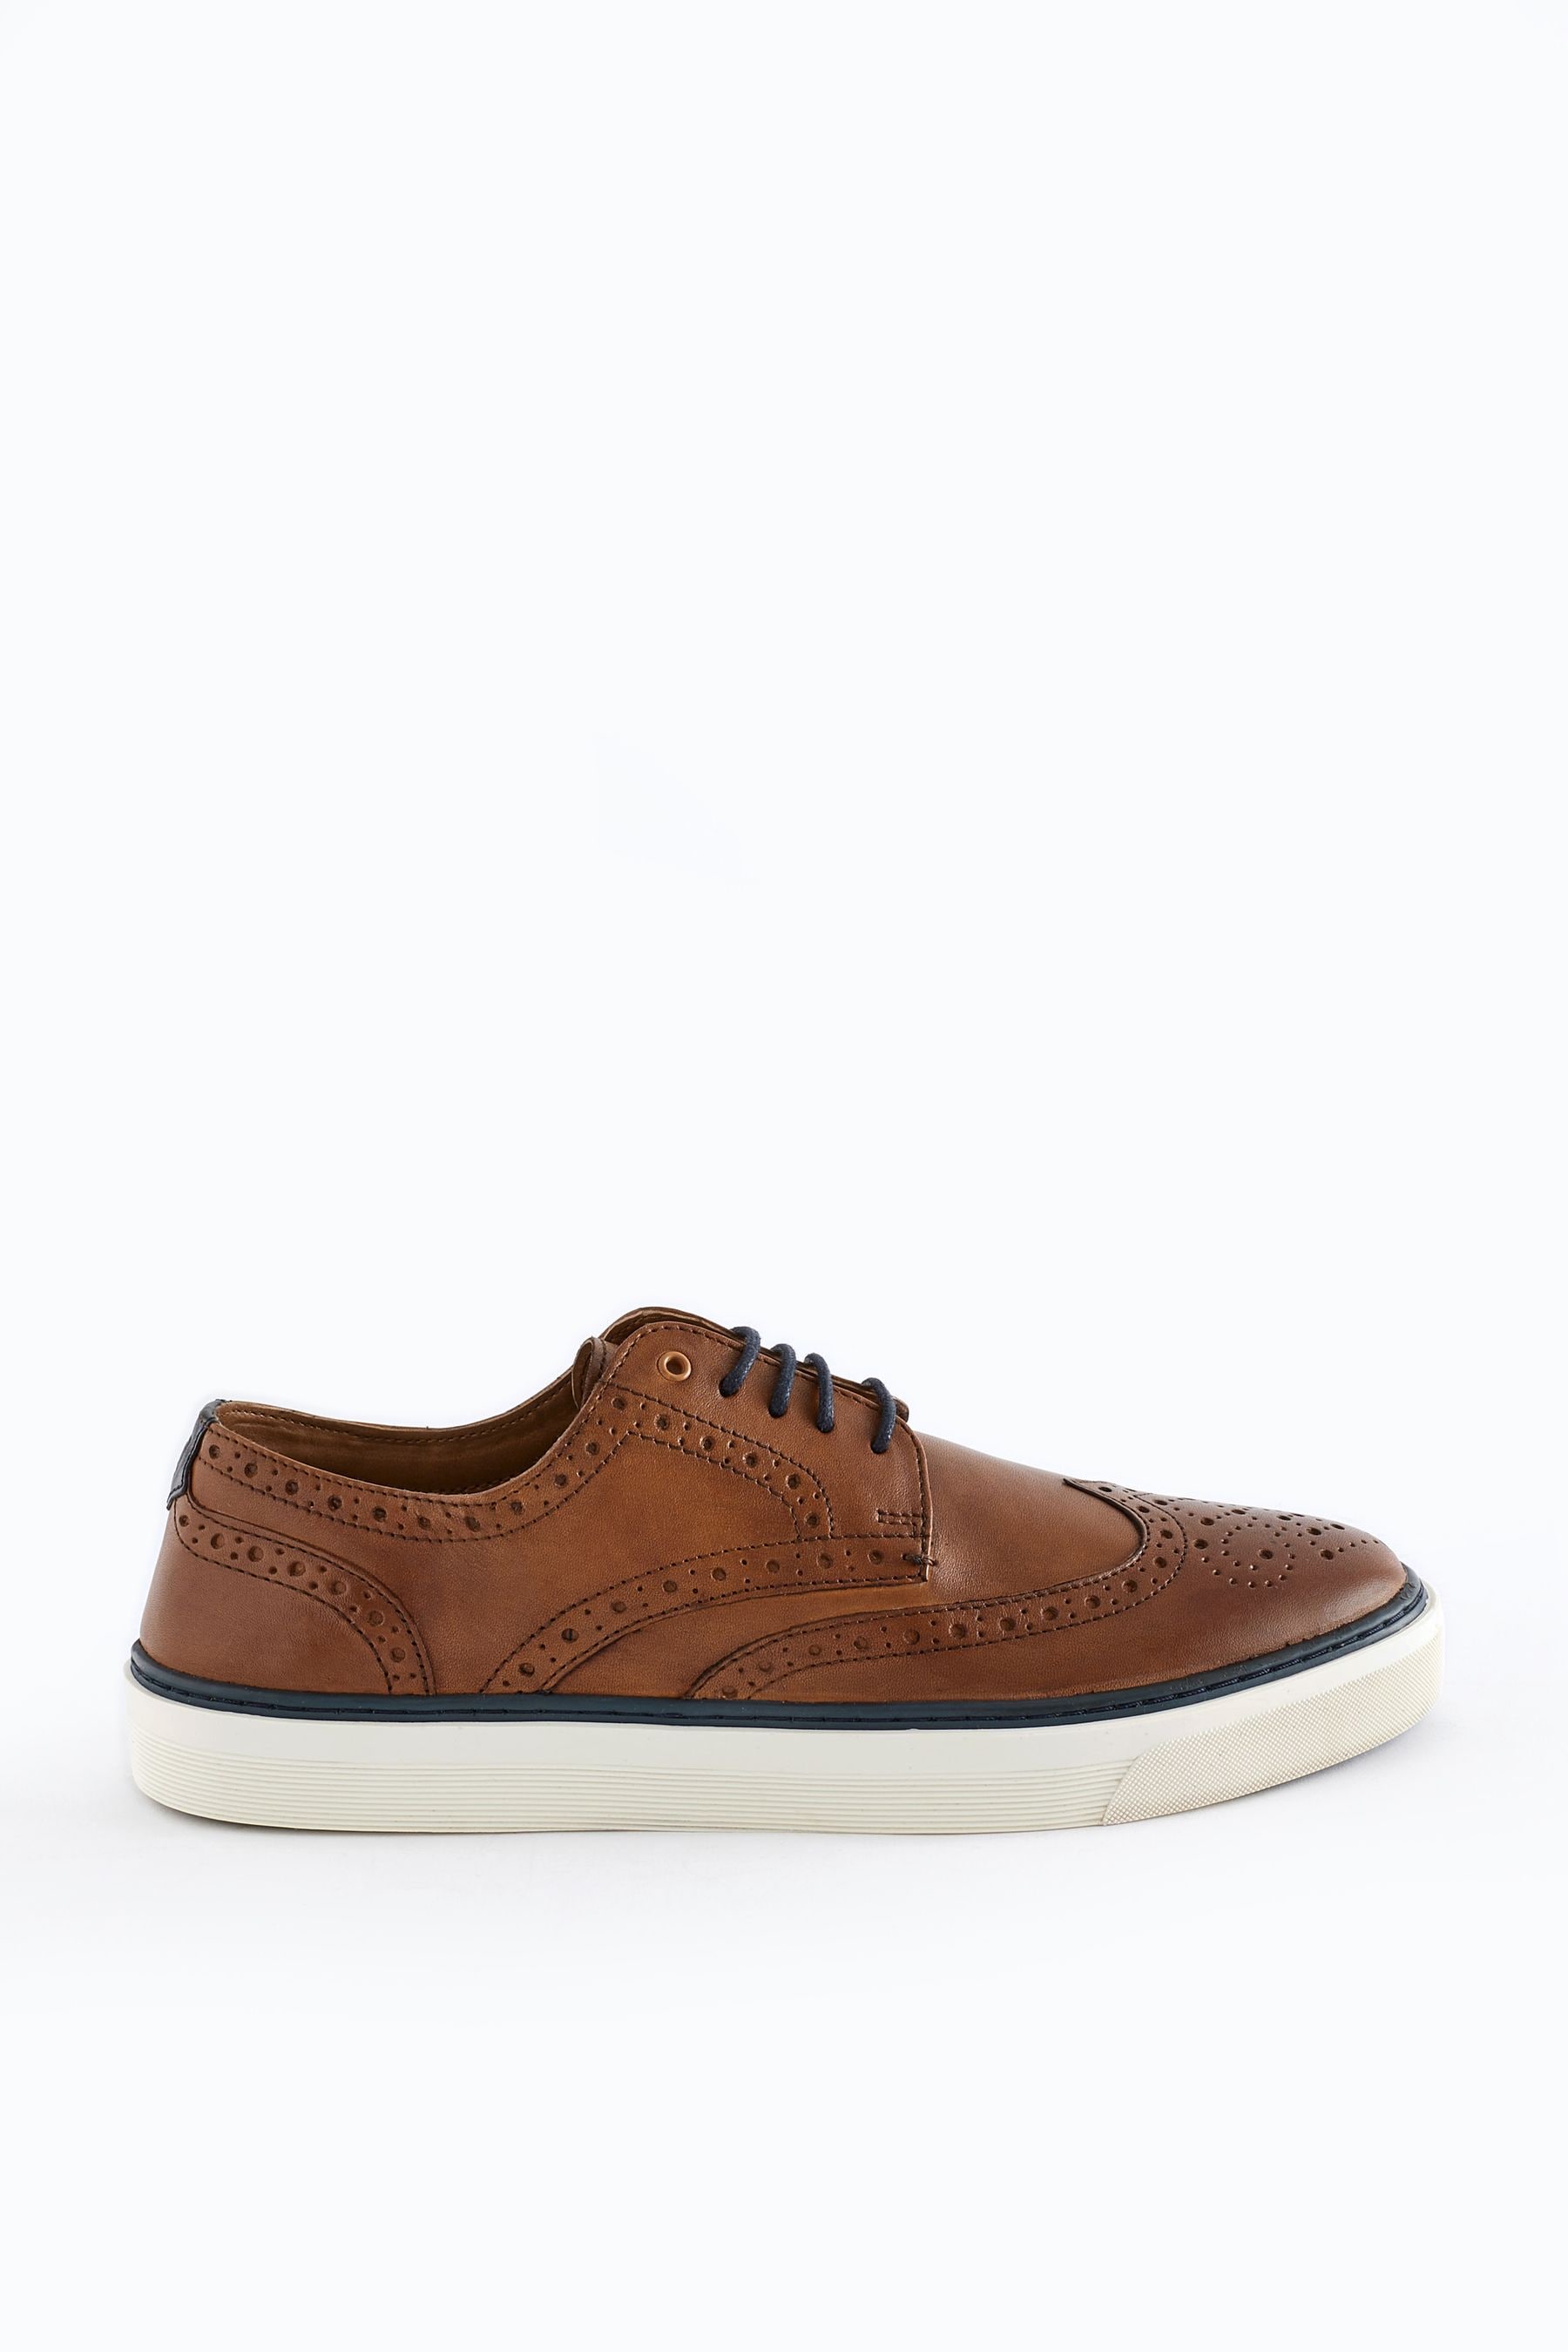 Buy Tan Brown Leather Brogue Cupsole Shoes from Next Saudi Arabia